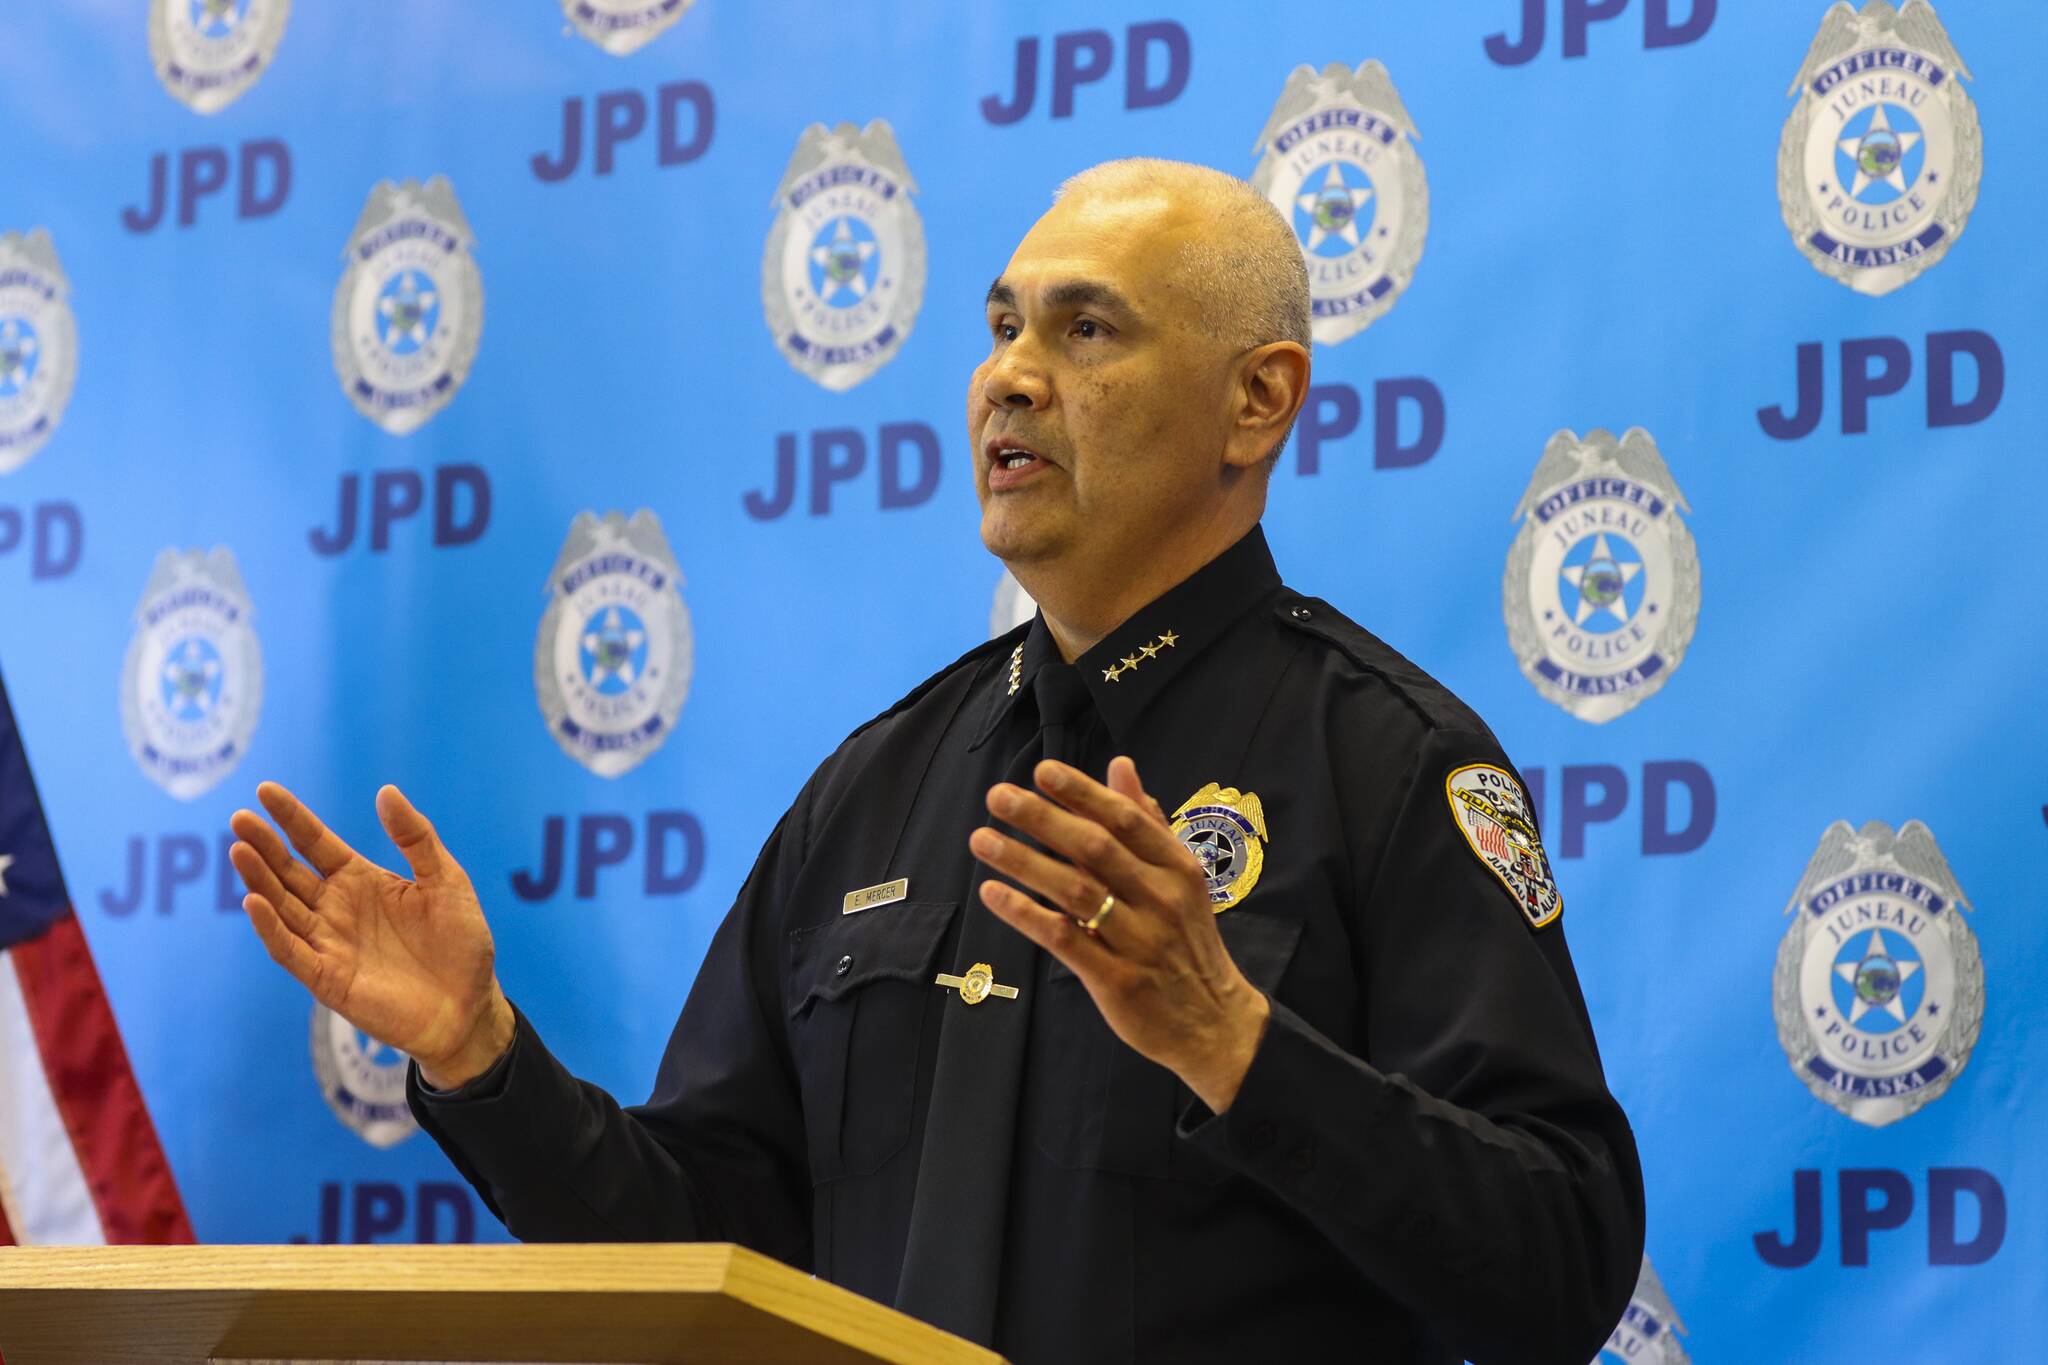 Chief Ed Mercer of the Juneau Police Department speaks during a department event on June 9, 2022. The department has made three major drug busts in the last week, seizing  illegal drugs valued at more than $300,000 locally. (Michael S. Lockett / Juneau Empire)